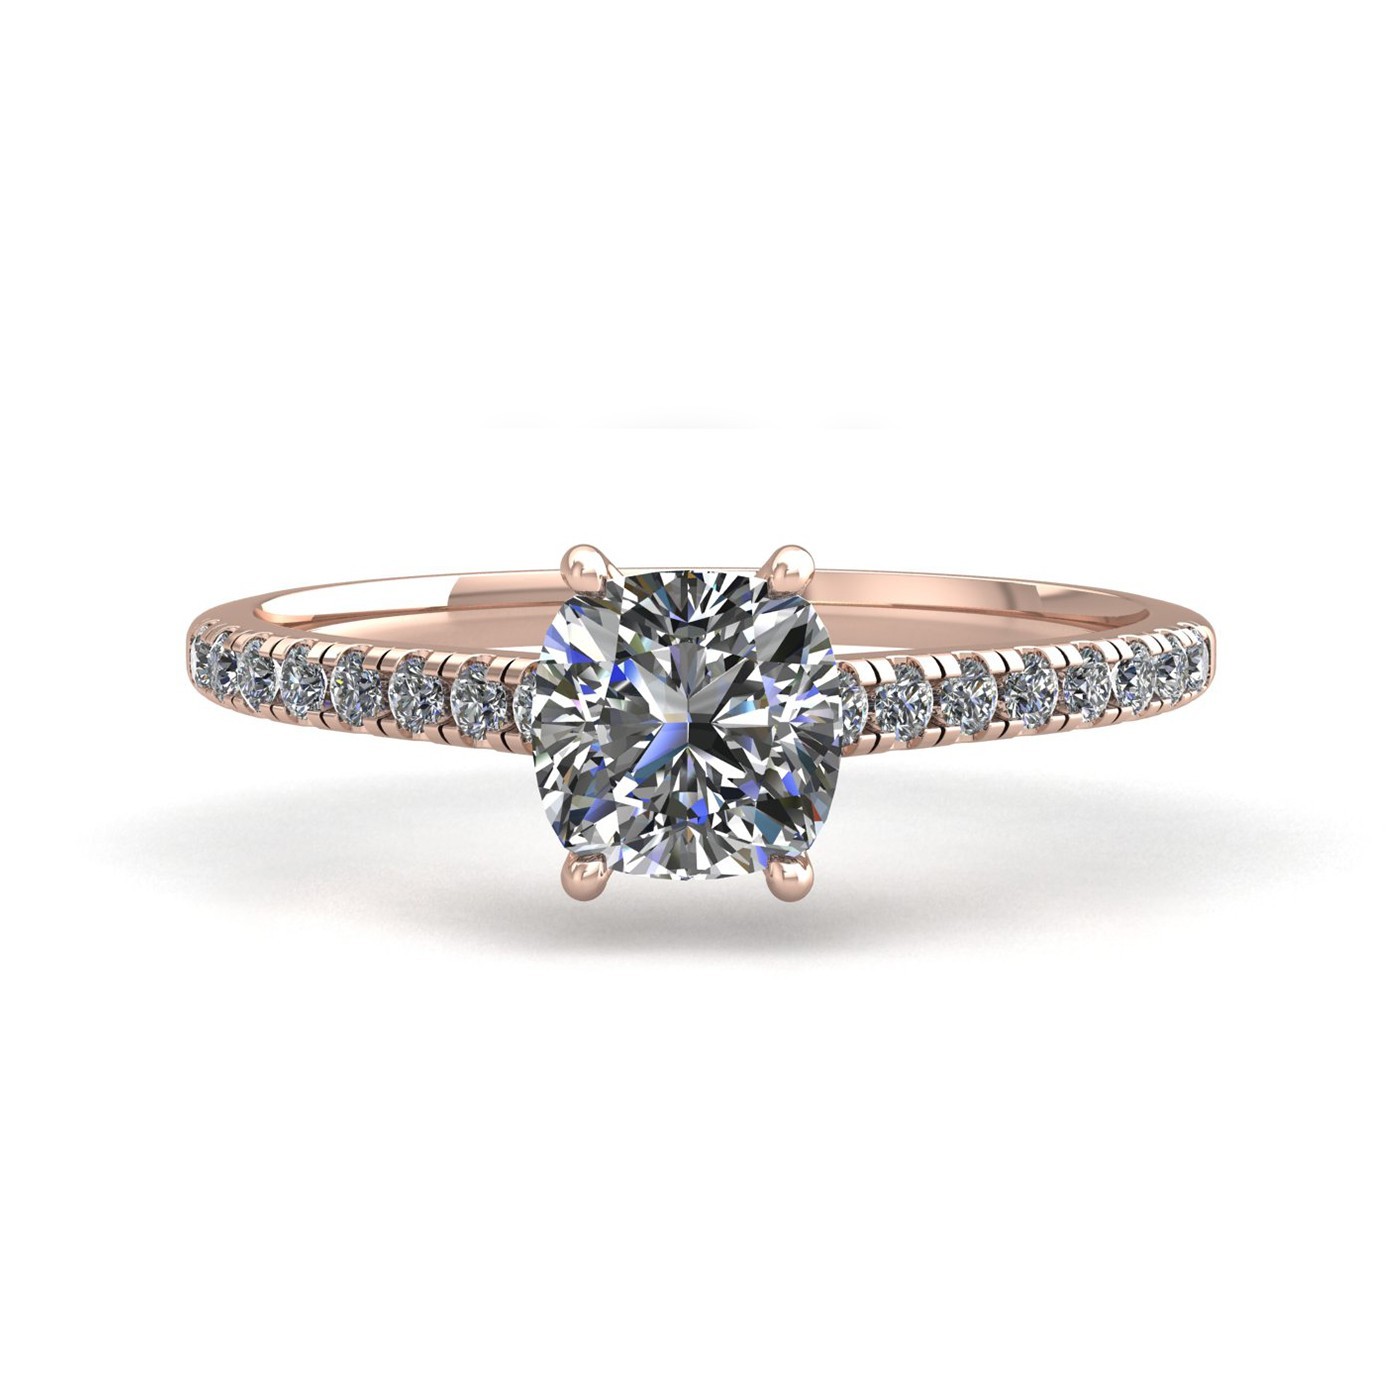 18k rose gold  0,30 ct 4 prongs cushion cut diamond engagement ring with whisper thin pavÉ set band Photos & images